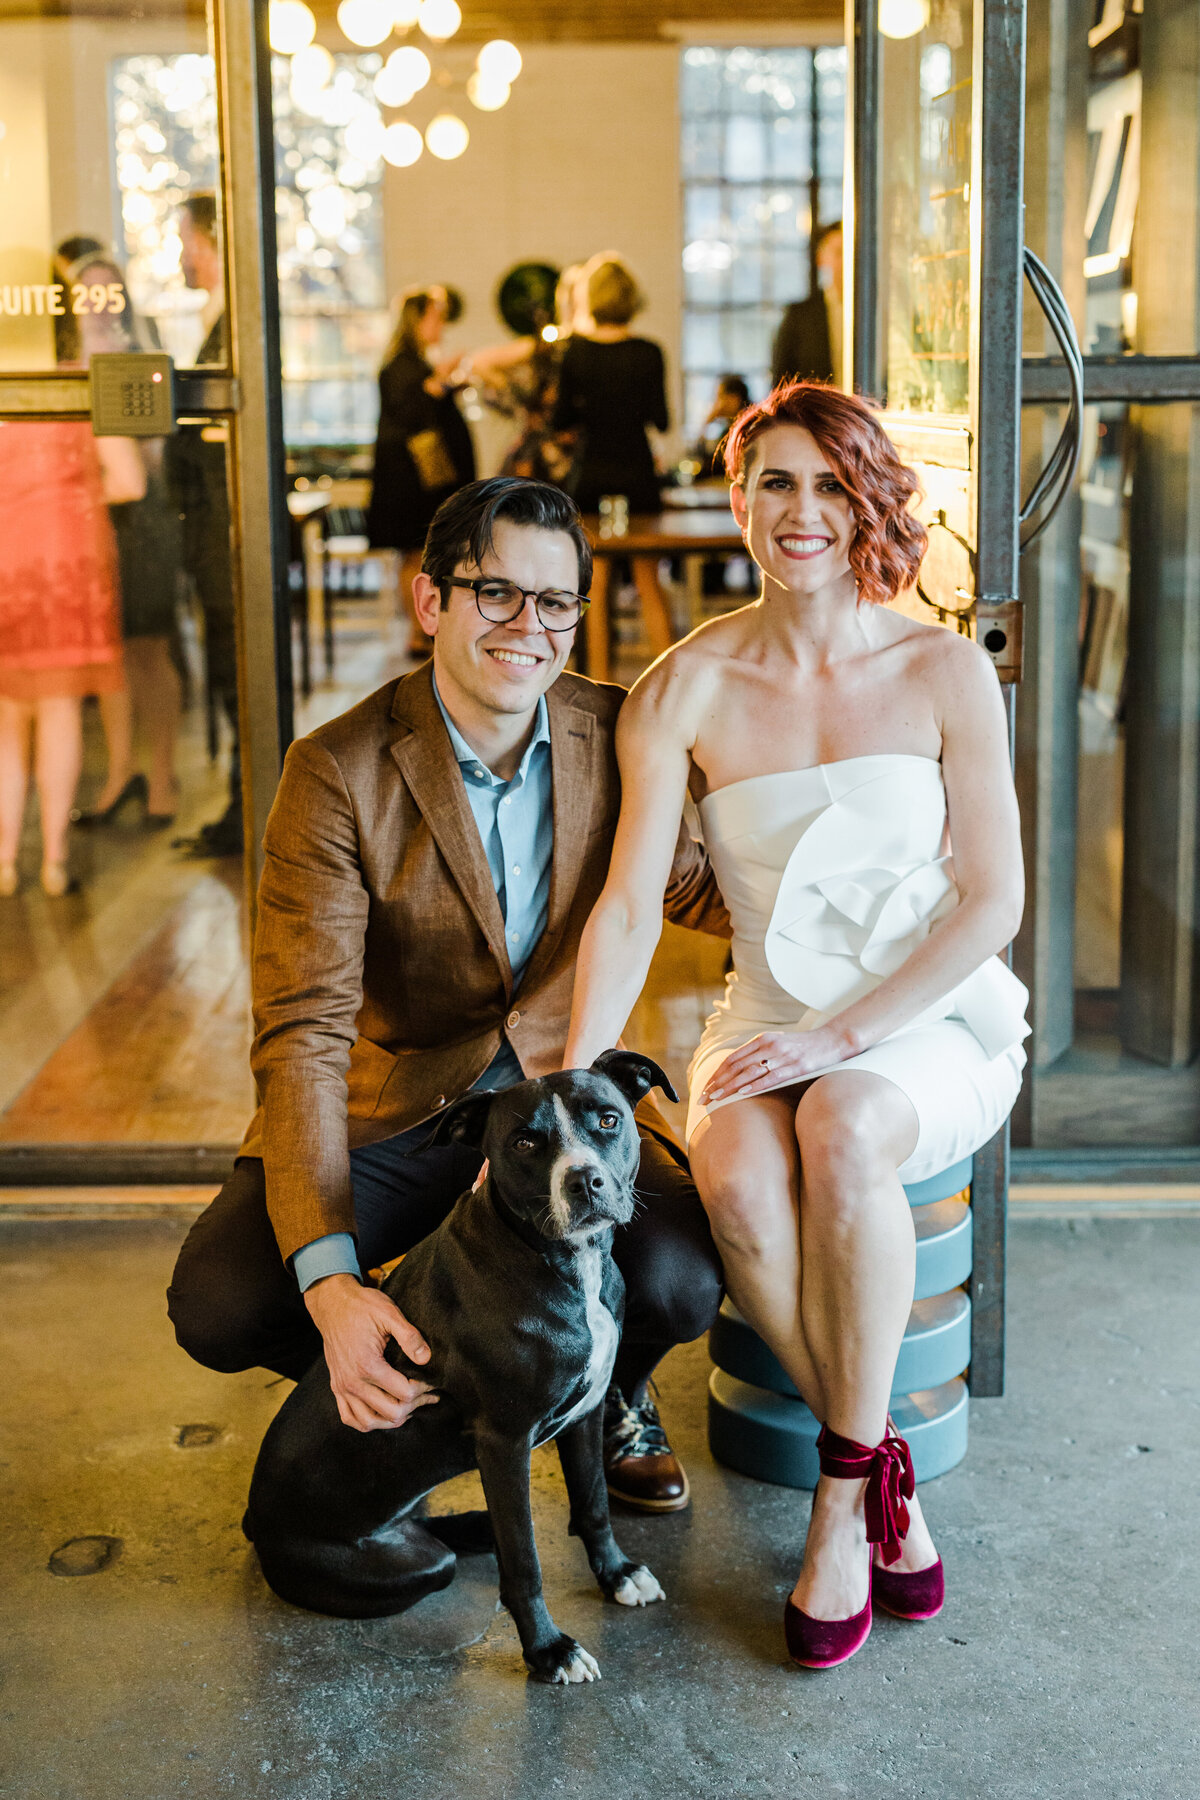 Portrait of a bride and groom with their dog on their wedding day in Dallas, Texas. The bride sits on a stool on the right and is wearing a sleeveless, simple yet elegant, white dress with red heels. The groom is kneeling down on the left and is wearing a brown blazer with dark dress pants. Their dog sits in front of the groom and is mostly black with a white stripe running down their face and chest.